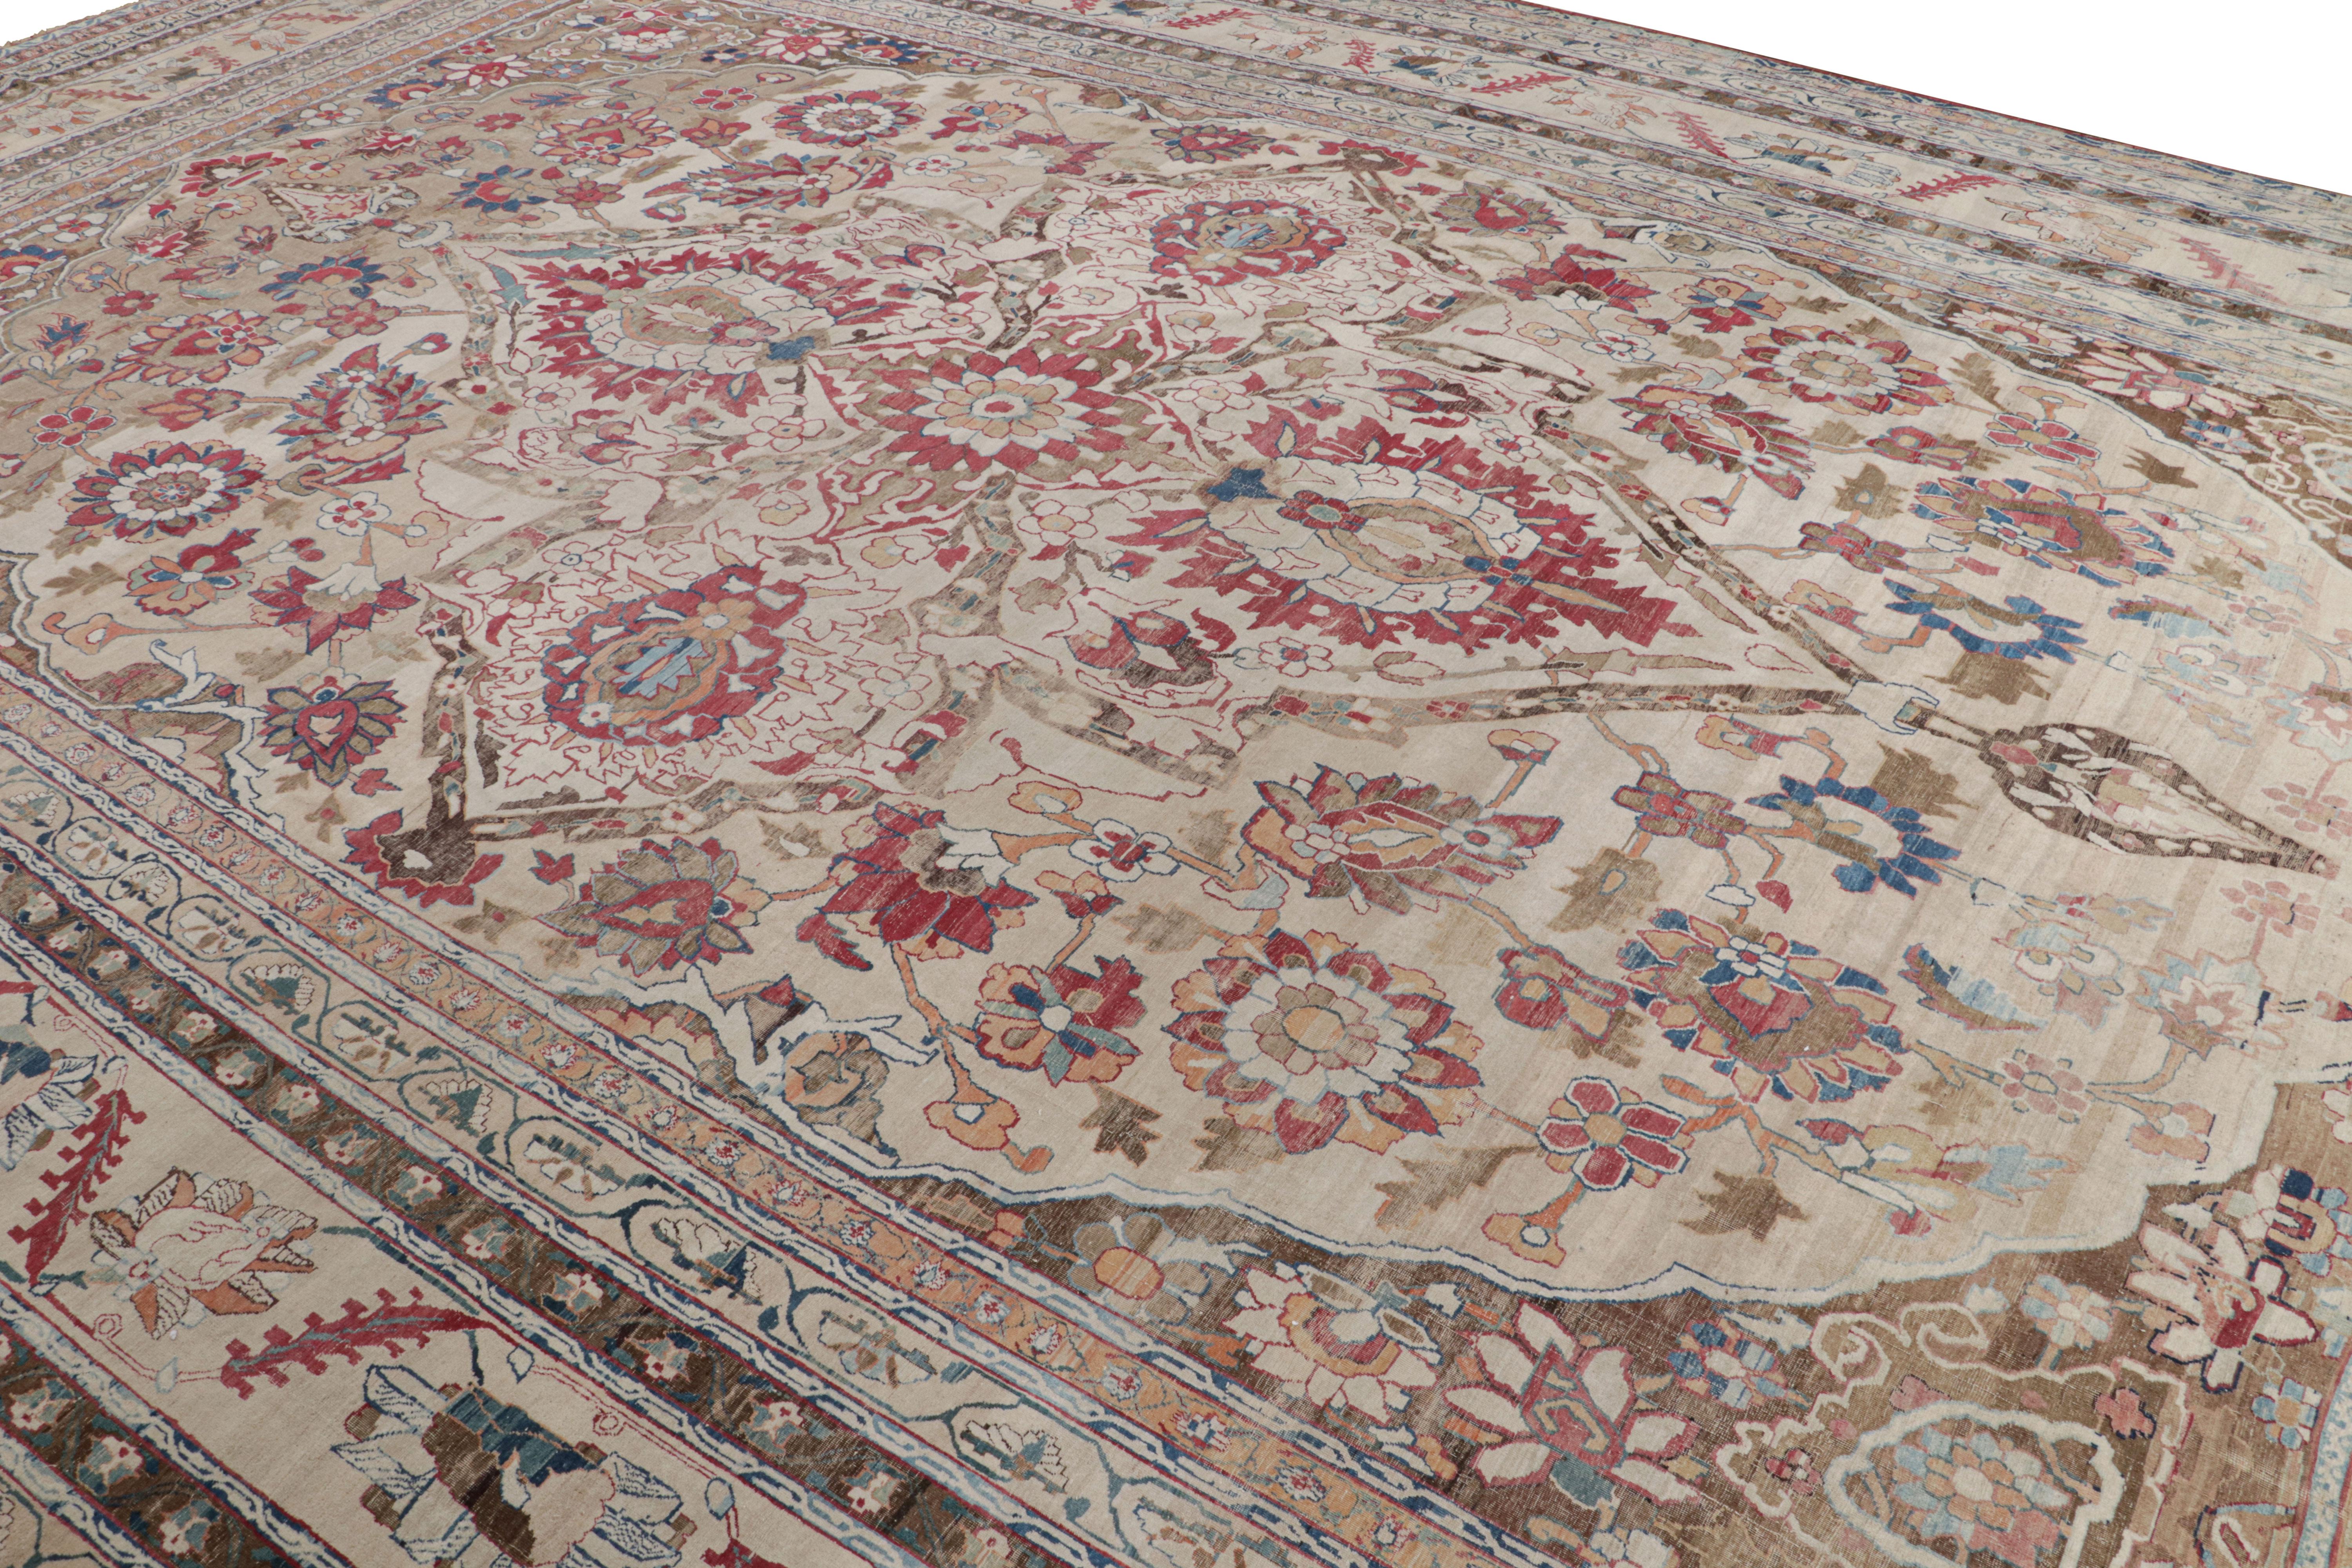 Oversized Antique Persian Kermanshah Rug with Floral Patterns In Good Condition For Sale In Long Island City, NY